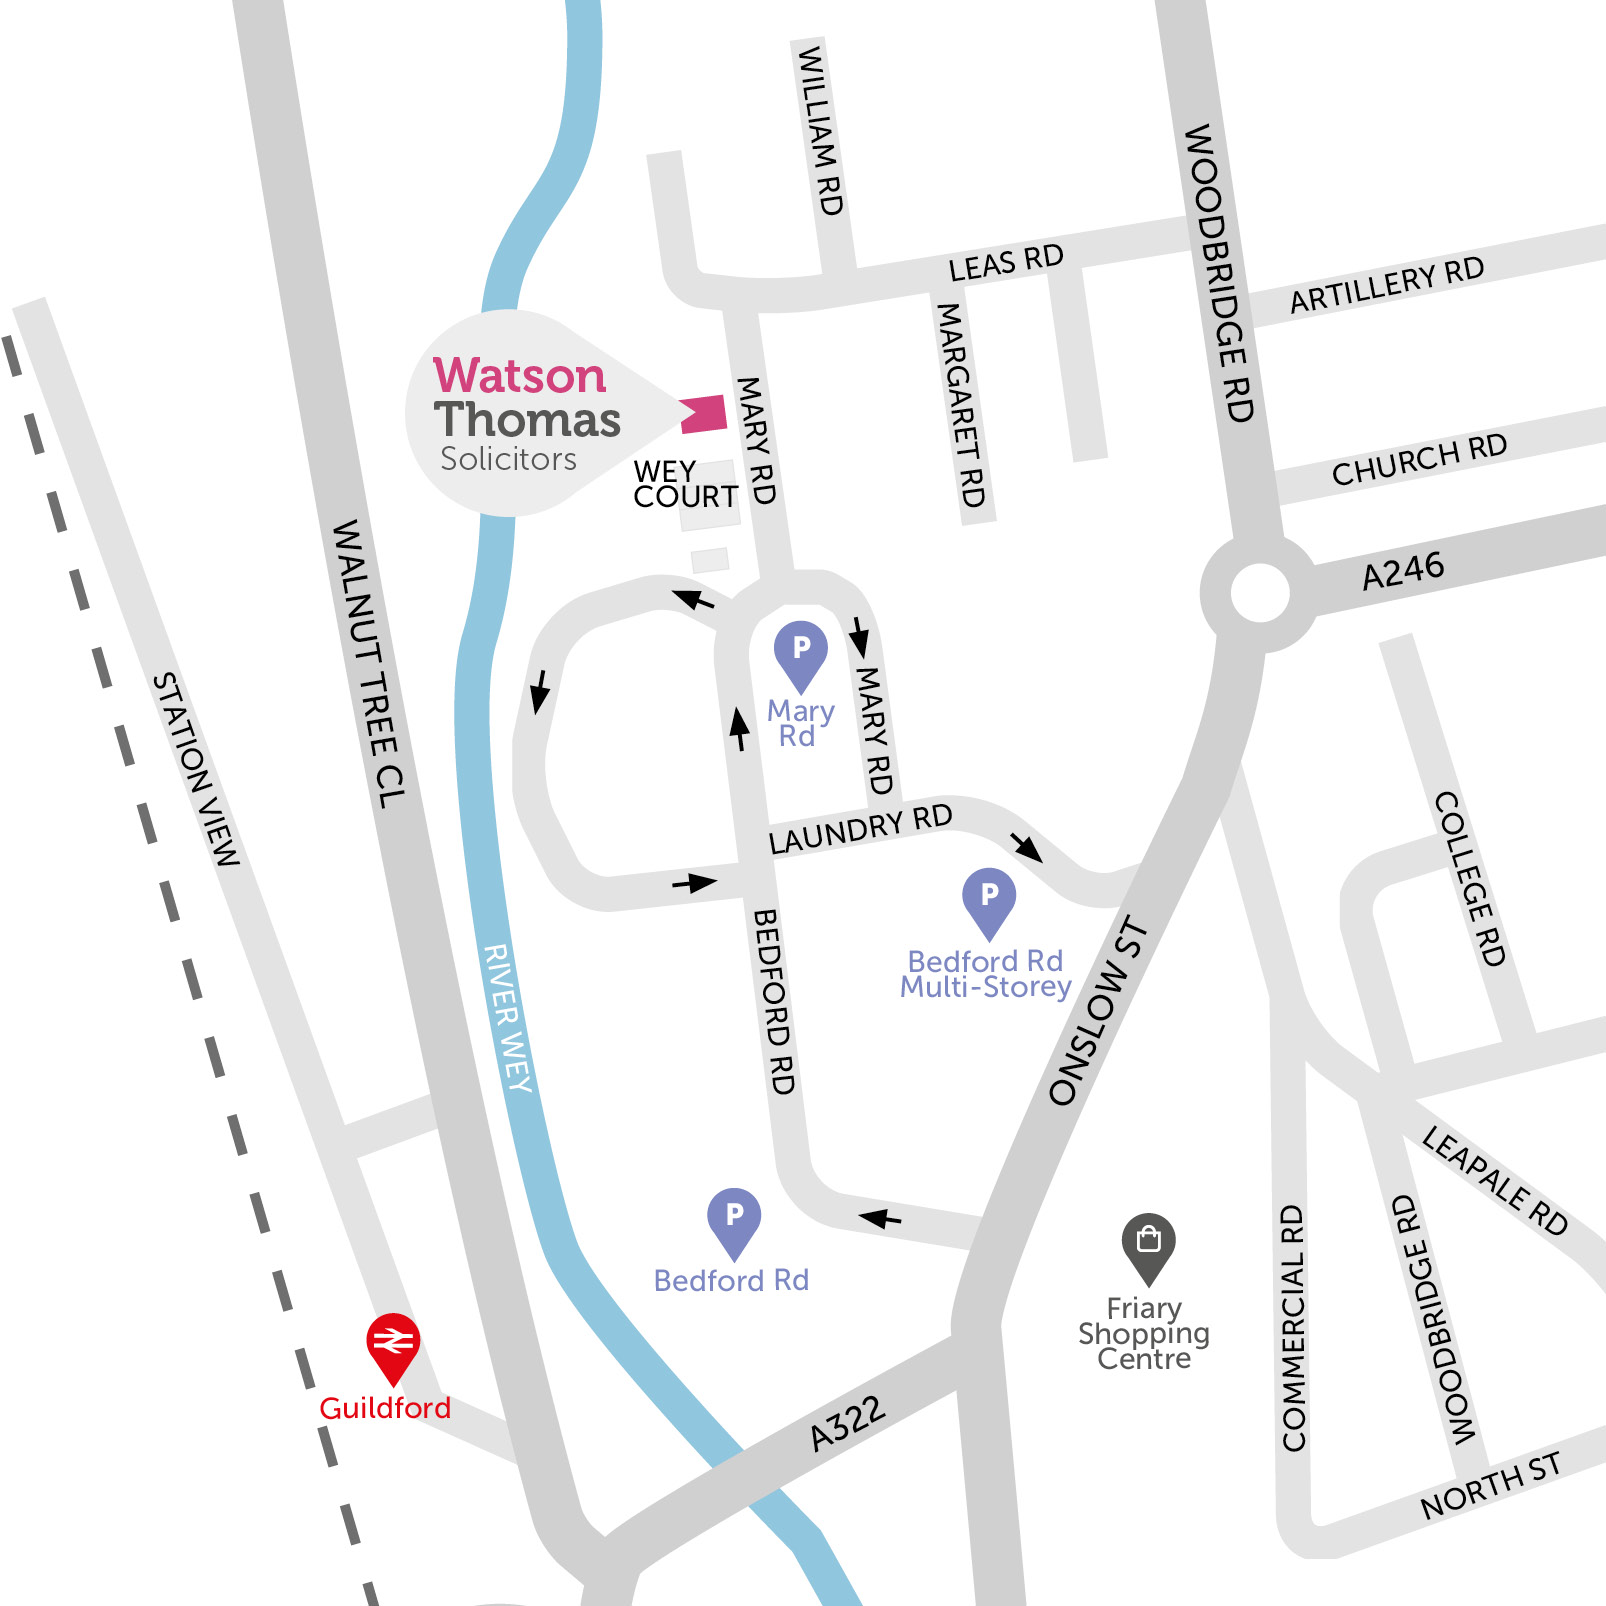 WatsonThomas Solicitors in Guildford